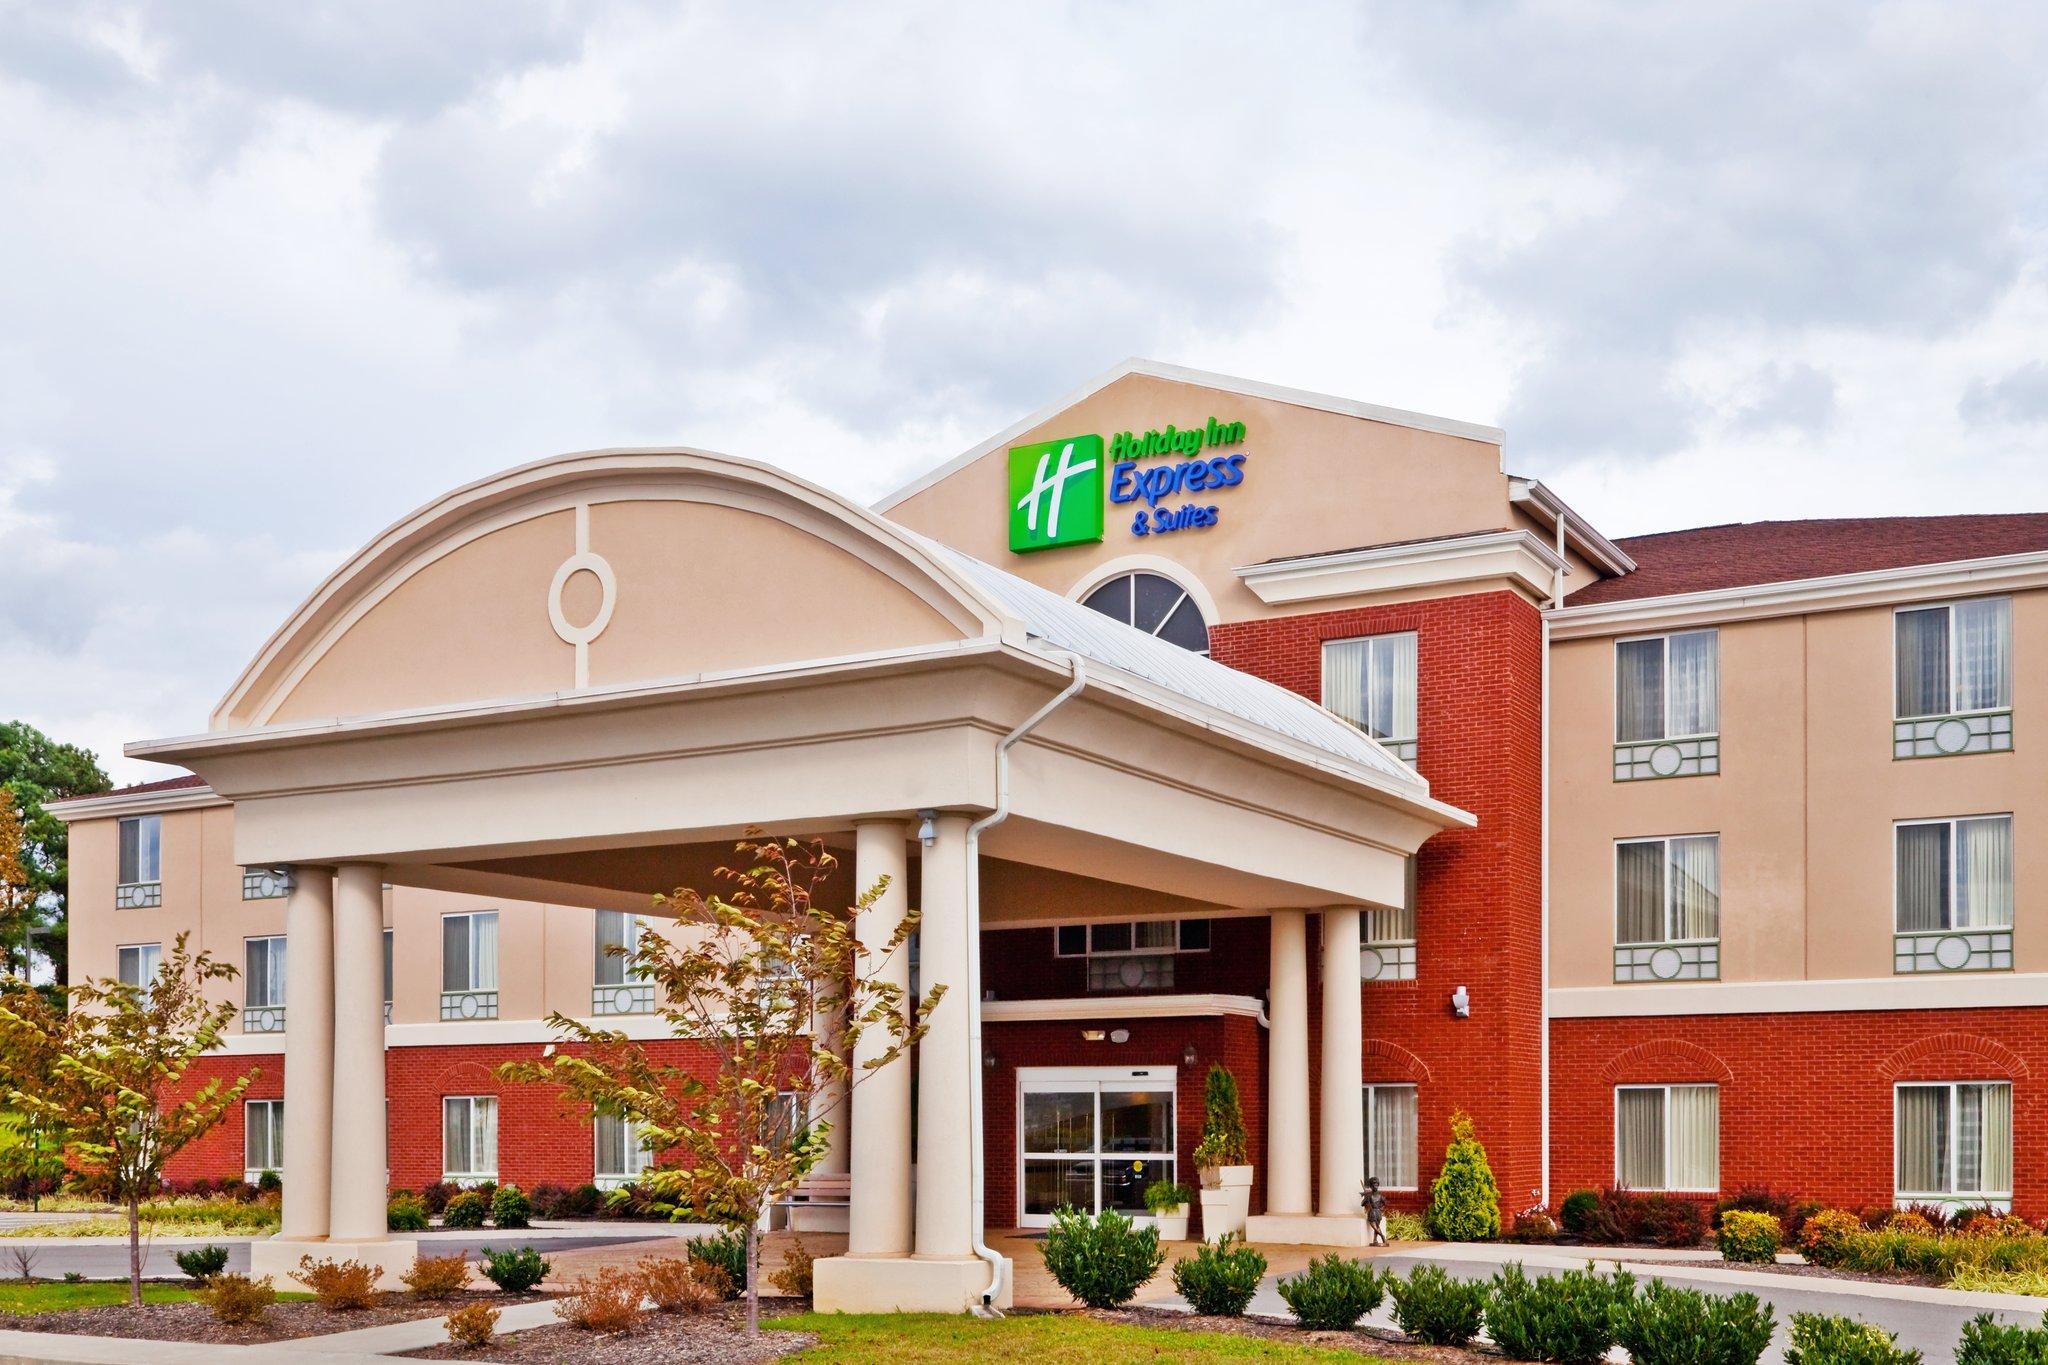 Holiday Inn Express Hotel & Suites Dickson in Dickson, TN